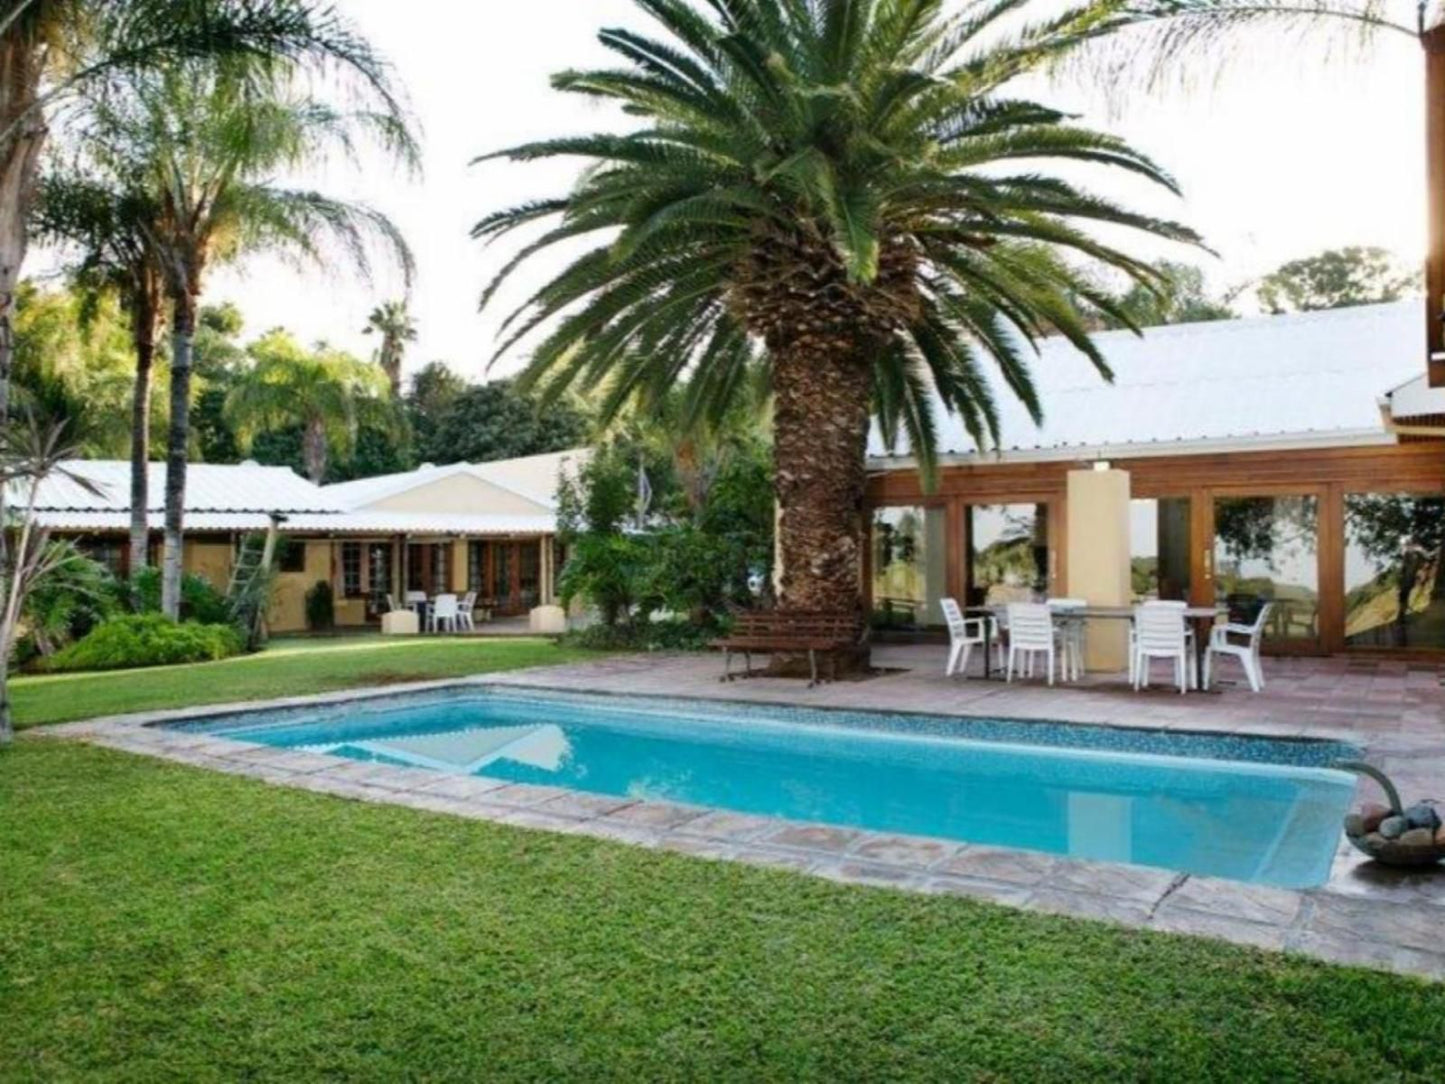 River Bank Lodge Upington Northern Cape South Africa House, Building, Architecture, Palm Tree, Plant, Nature, Wood, Swimming Pool